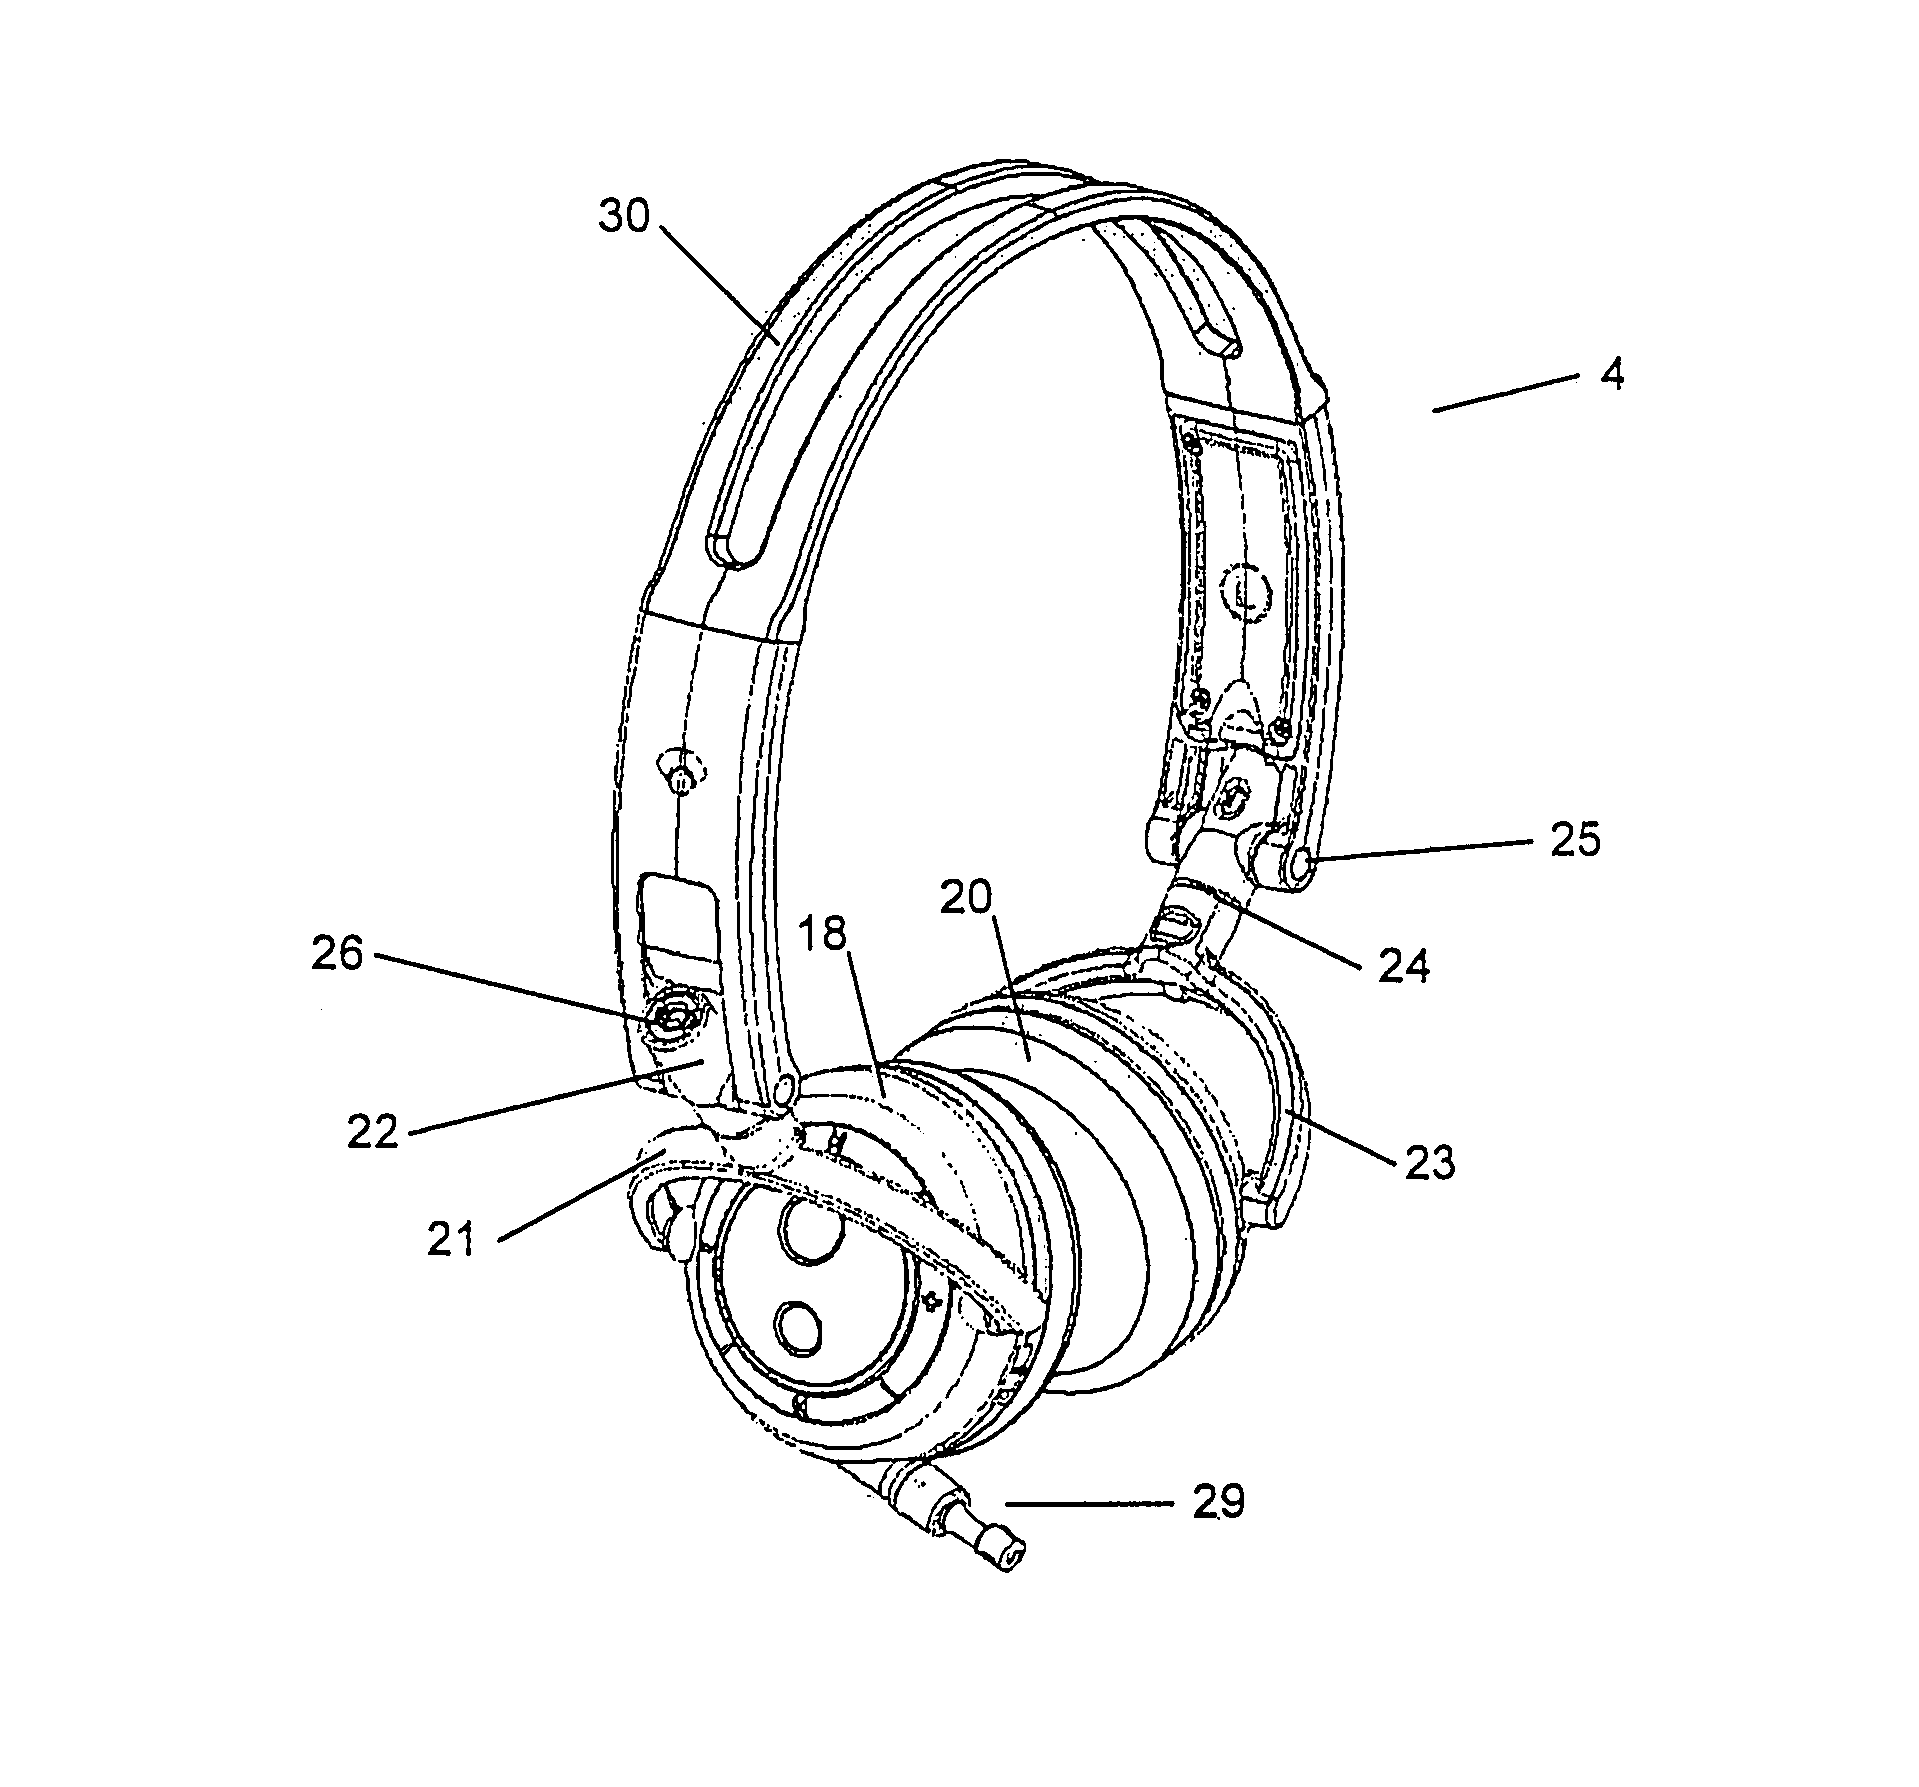 Headset charging station